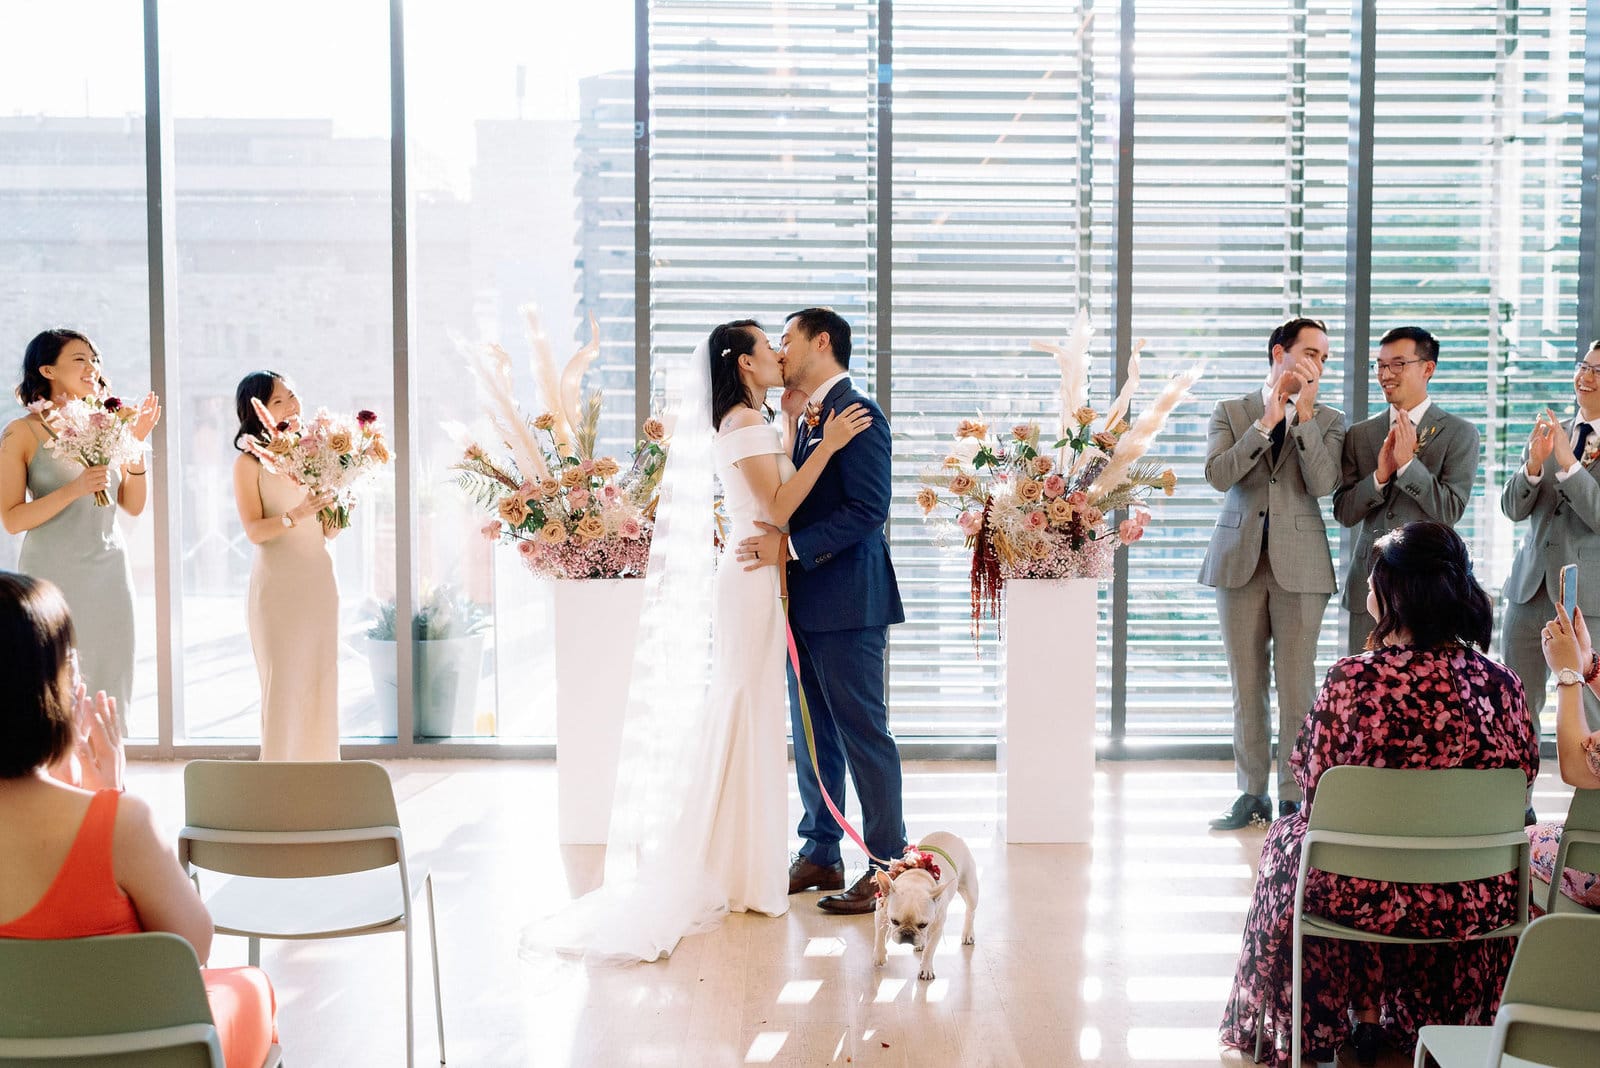 Couples first kiss at modern fall wedding ceremony gardiner museum downtown toronto modern romantic wedding jacqueline james photography